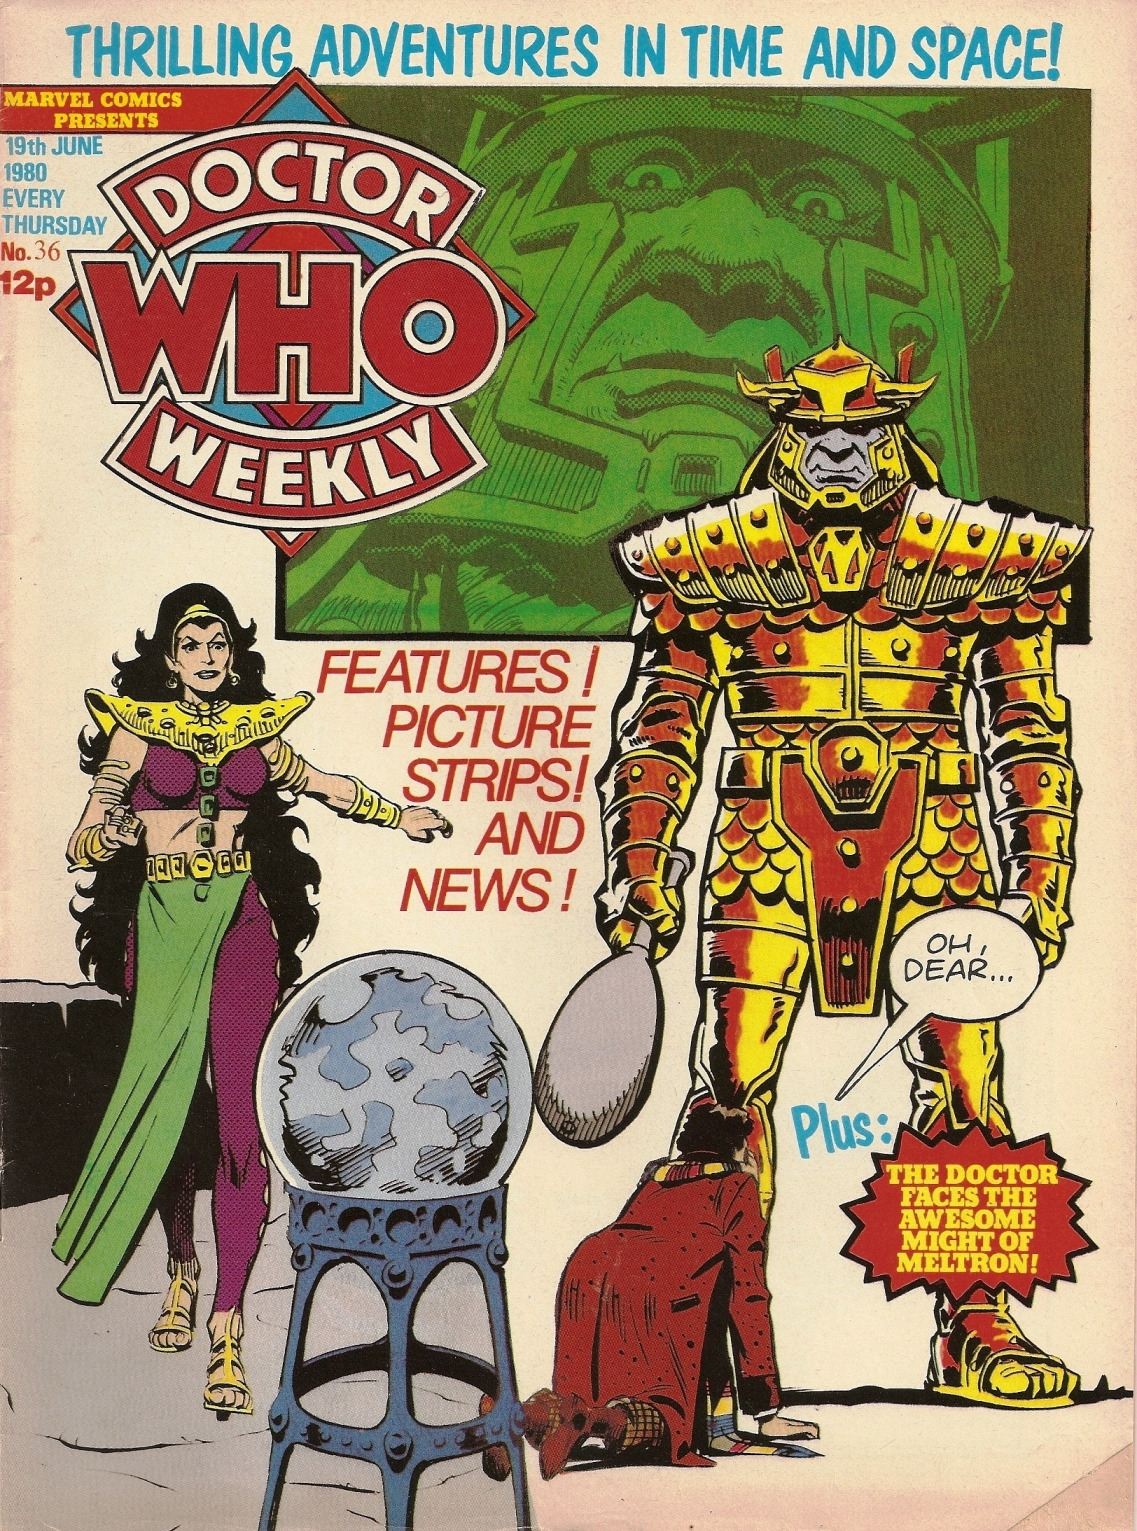 Doctor Who Weekly - Issue 36 - 19th June 1980